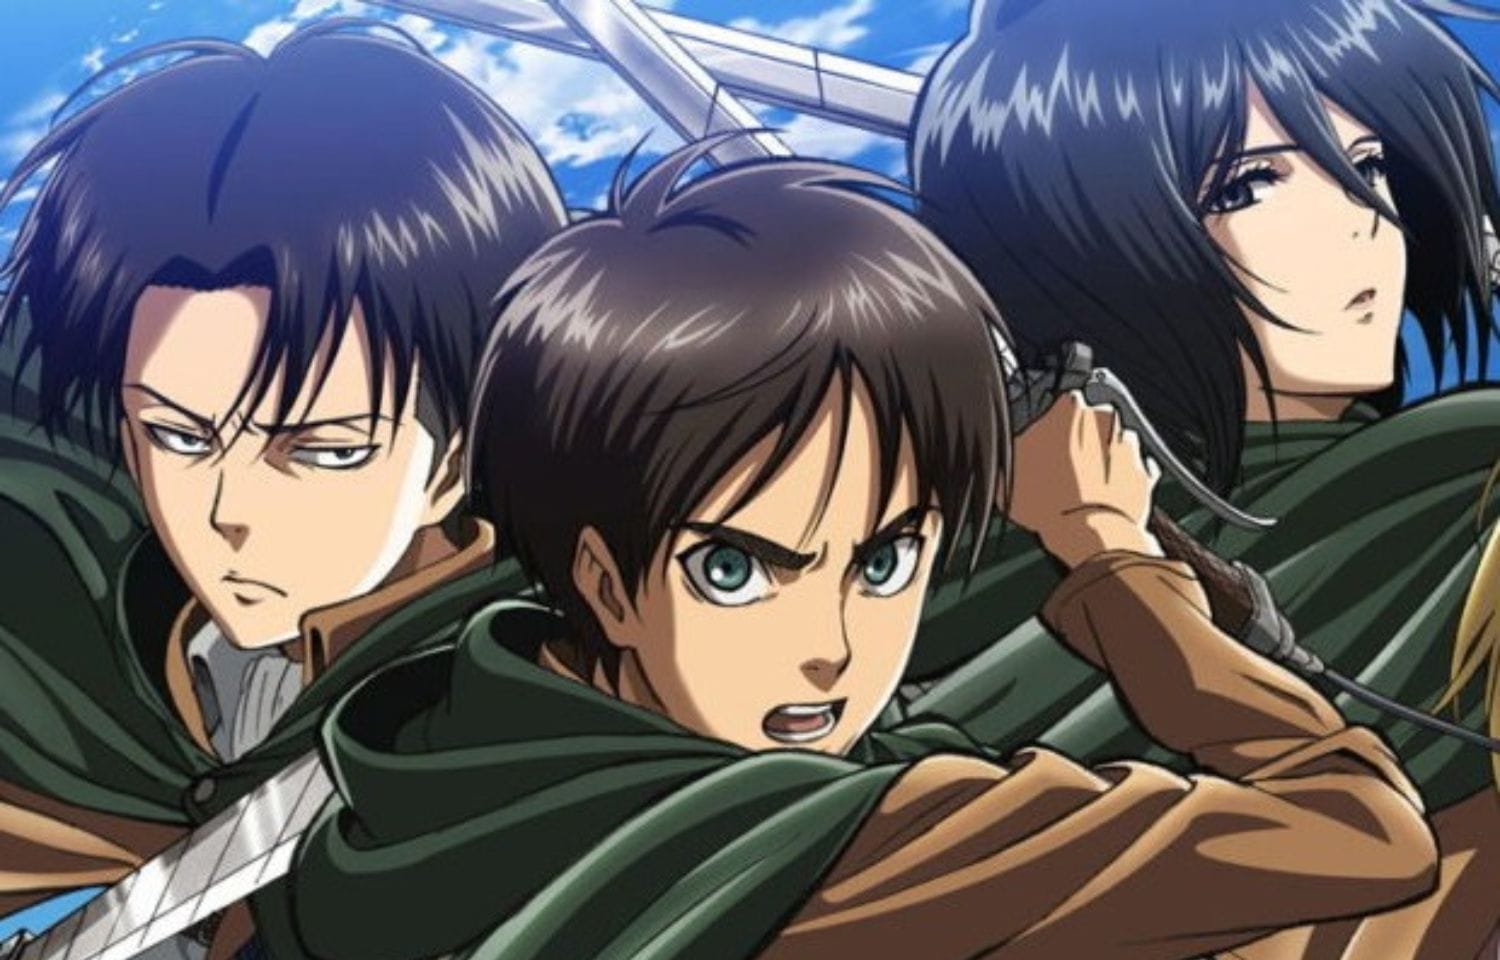 When is the Next Episode of Attack on Titan Coming Out?